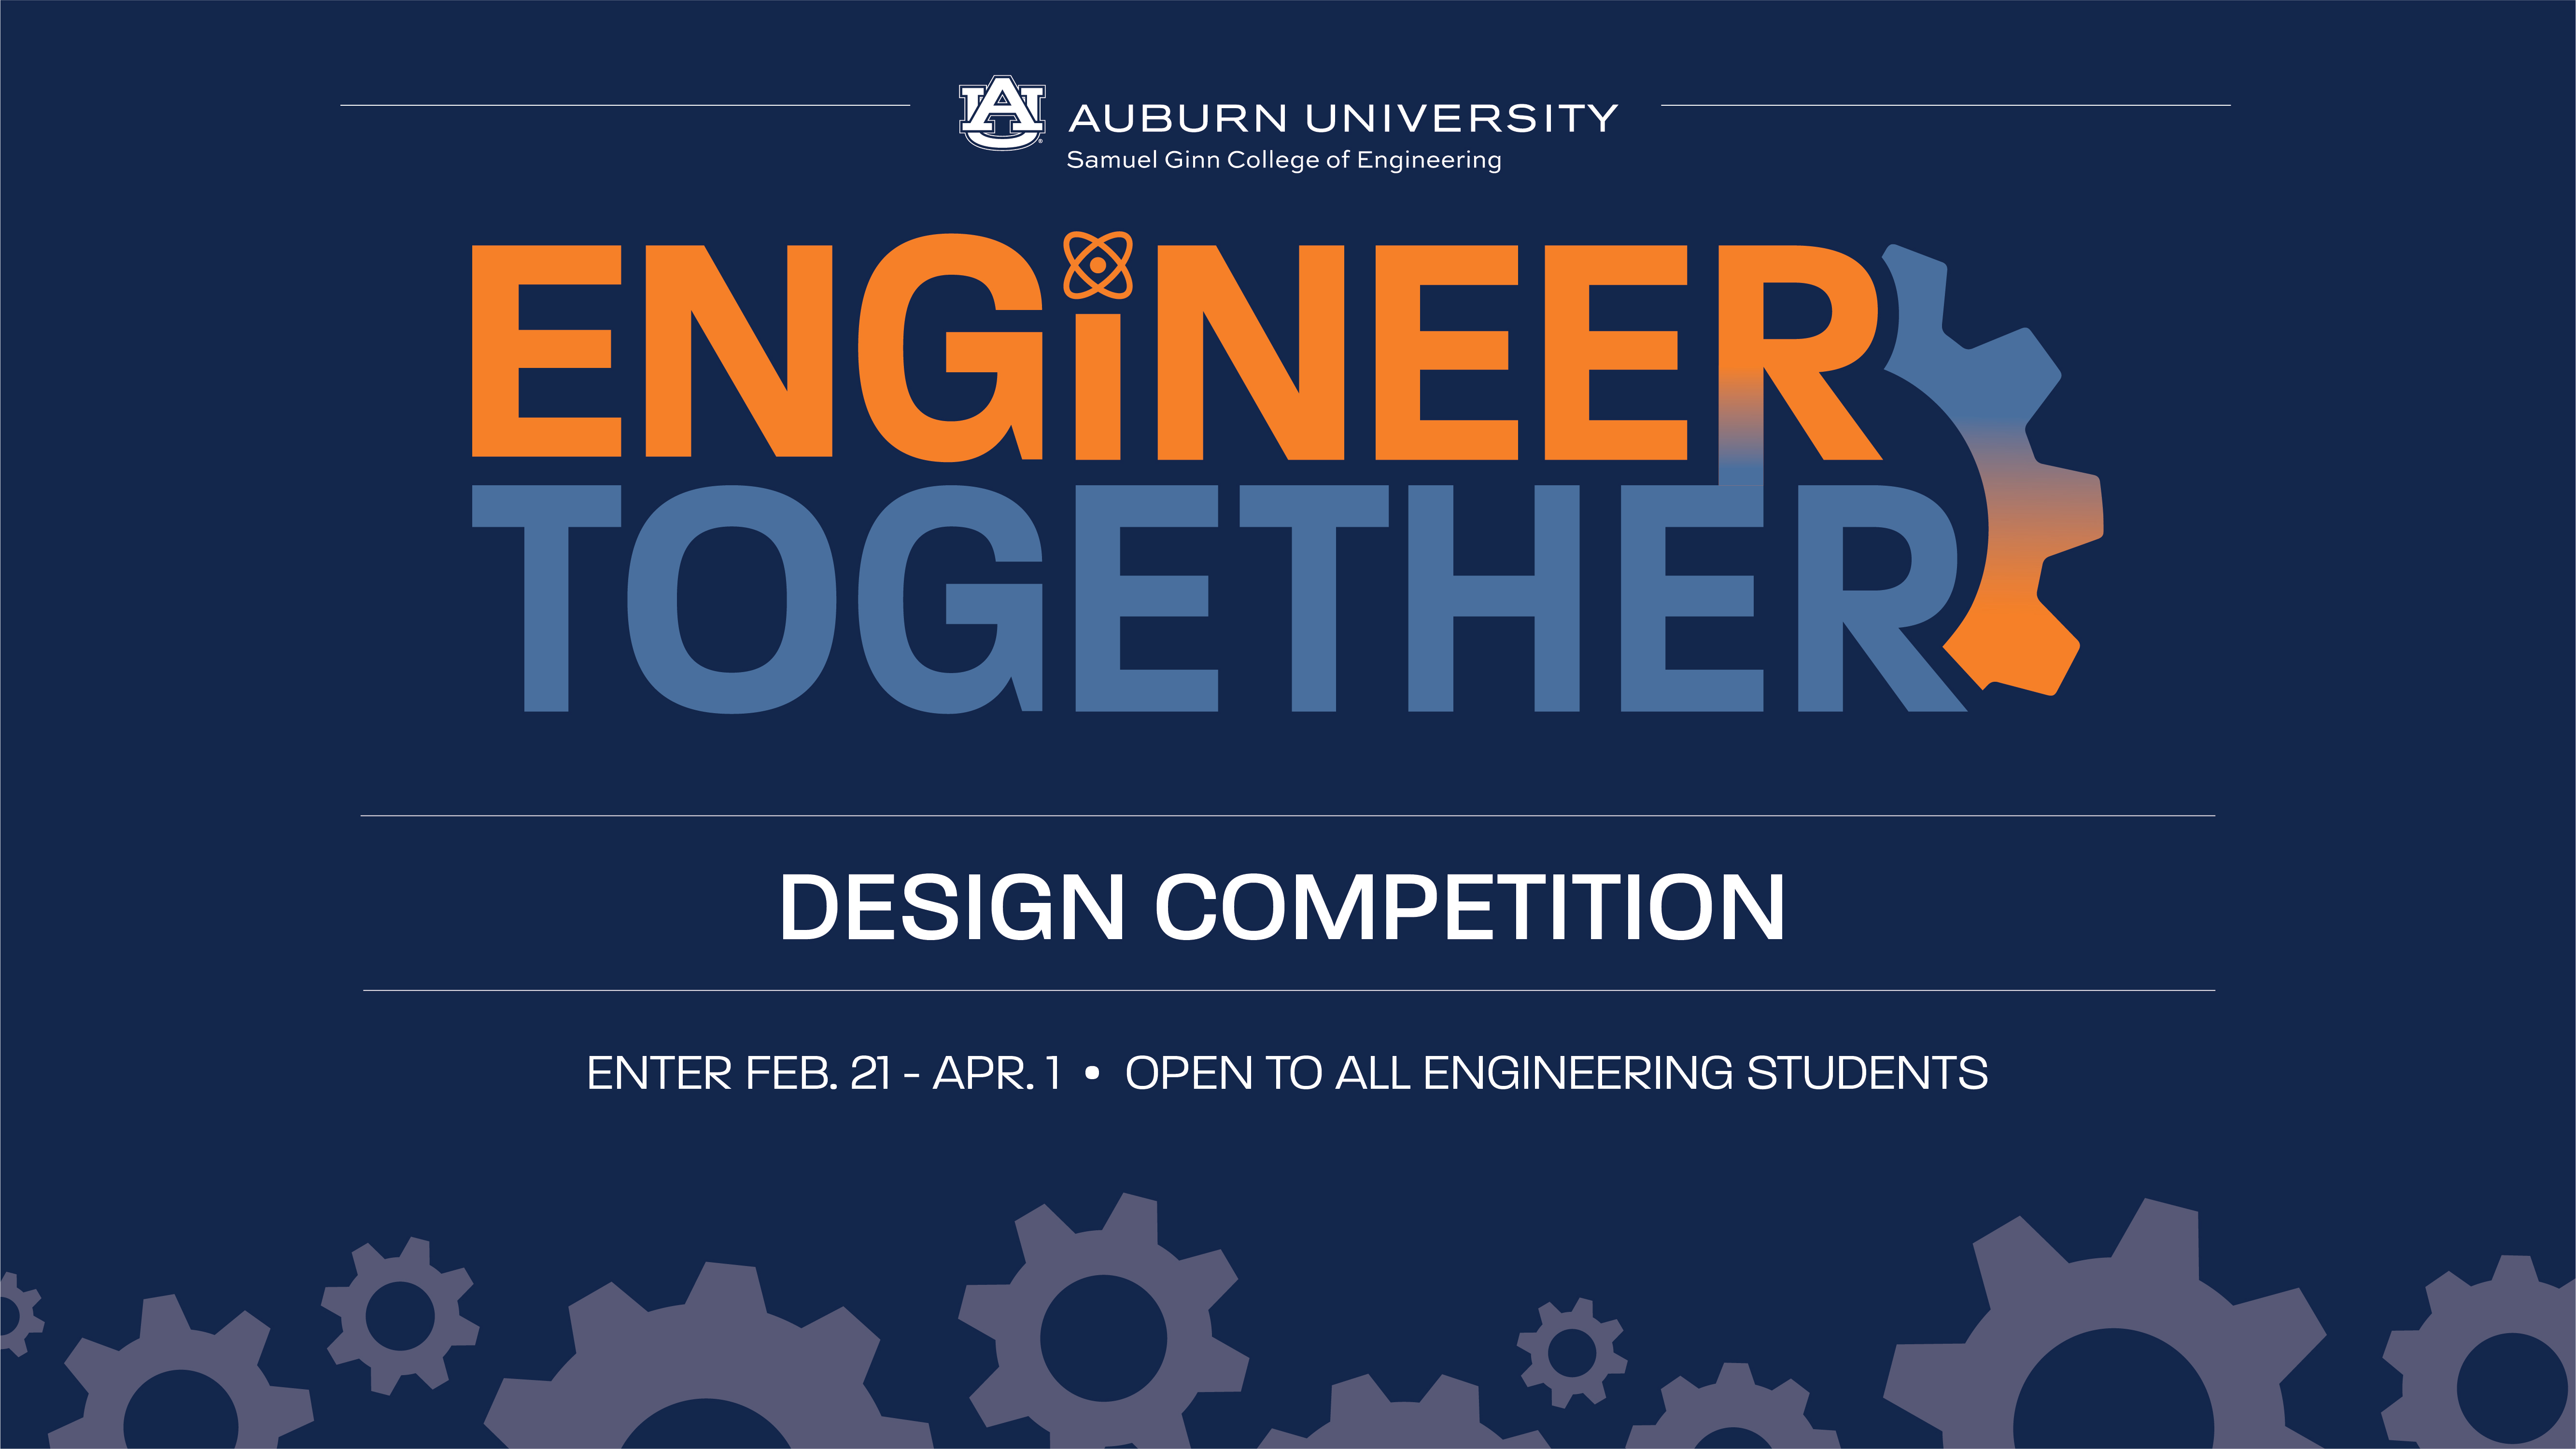 The design competition is open to all engineering students.